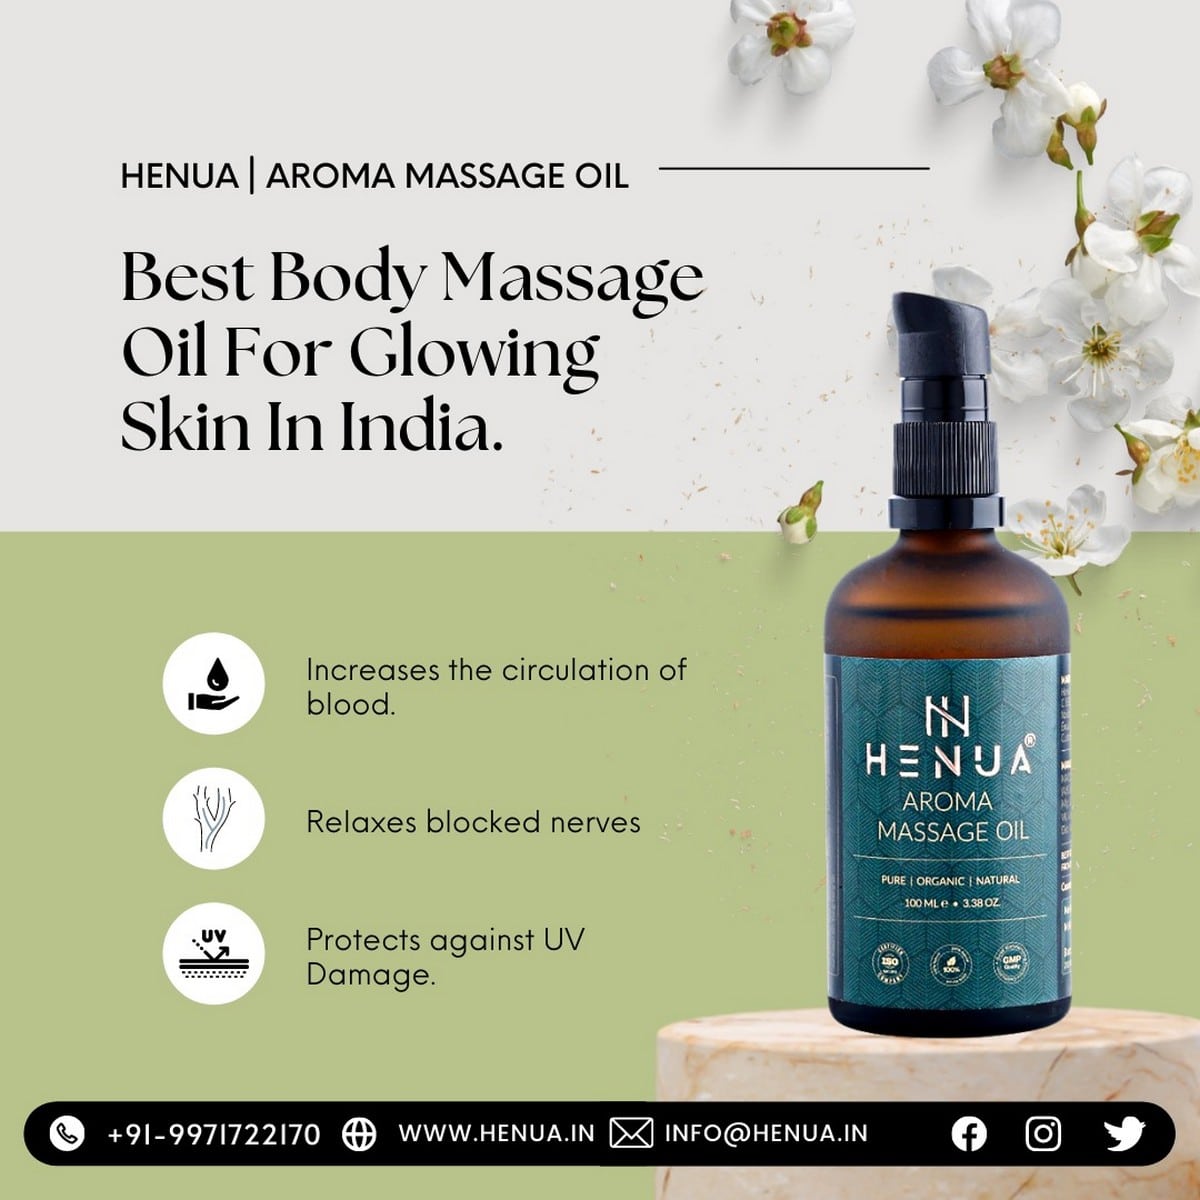 Best Body Massage Oil For Glowing Skin In India